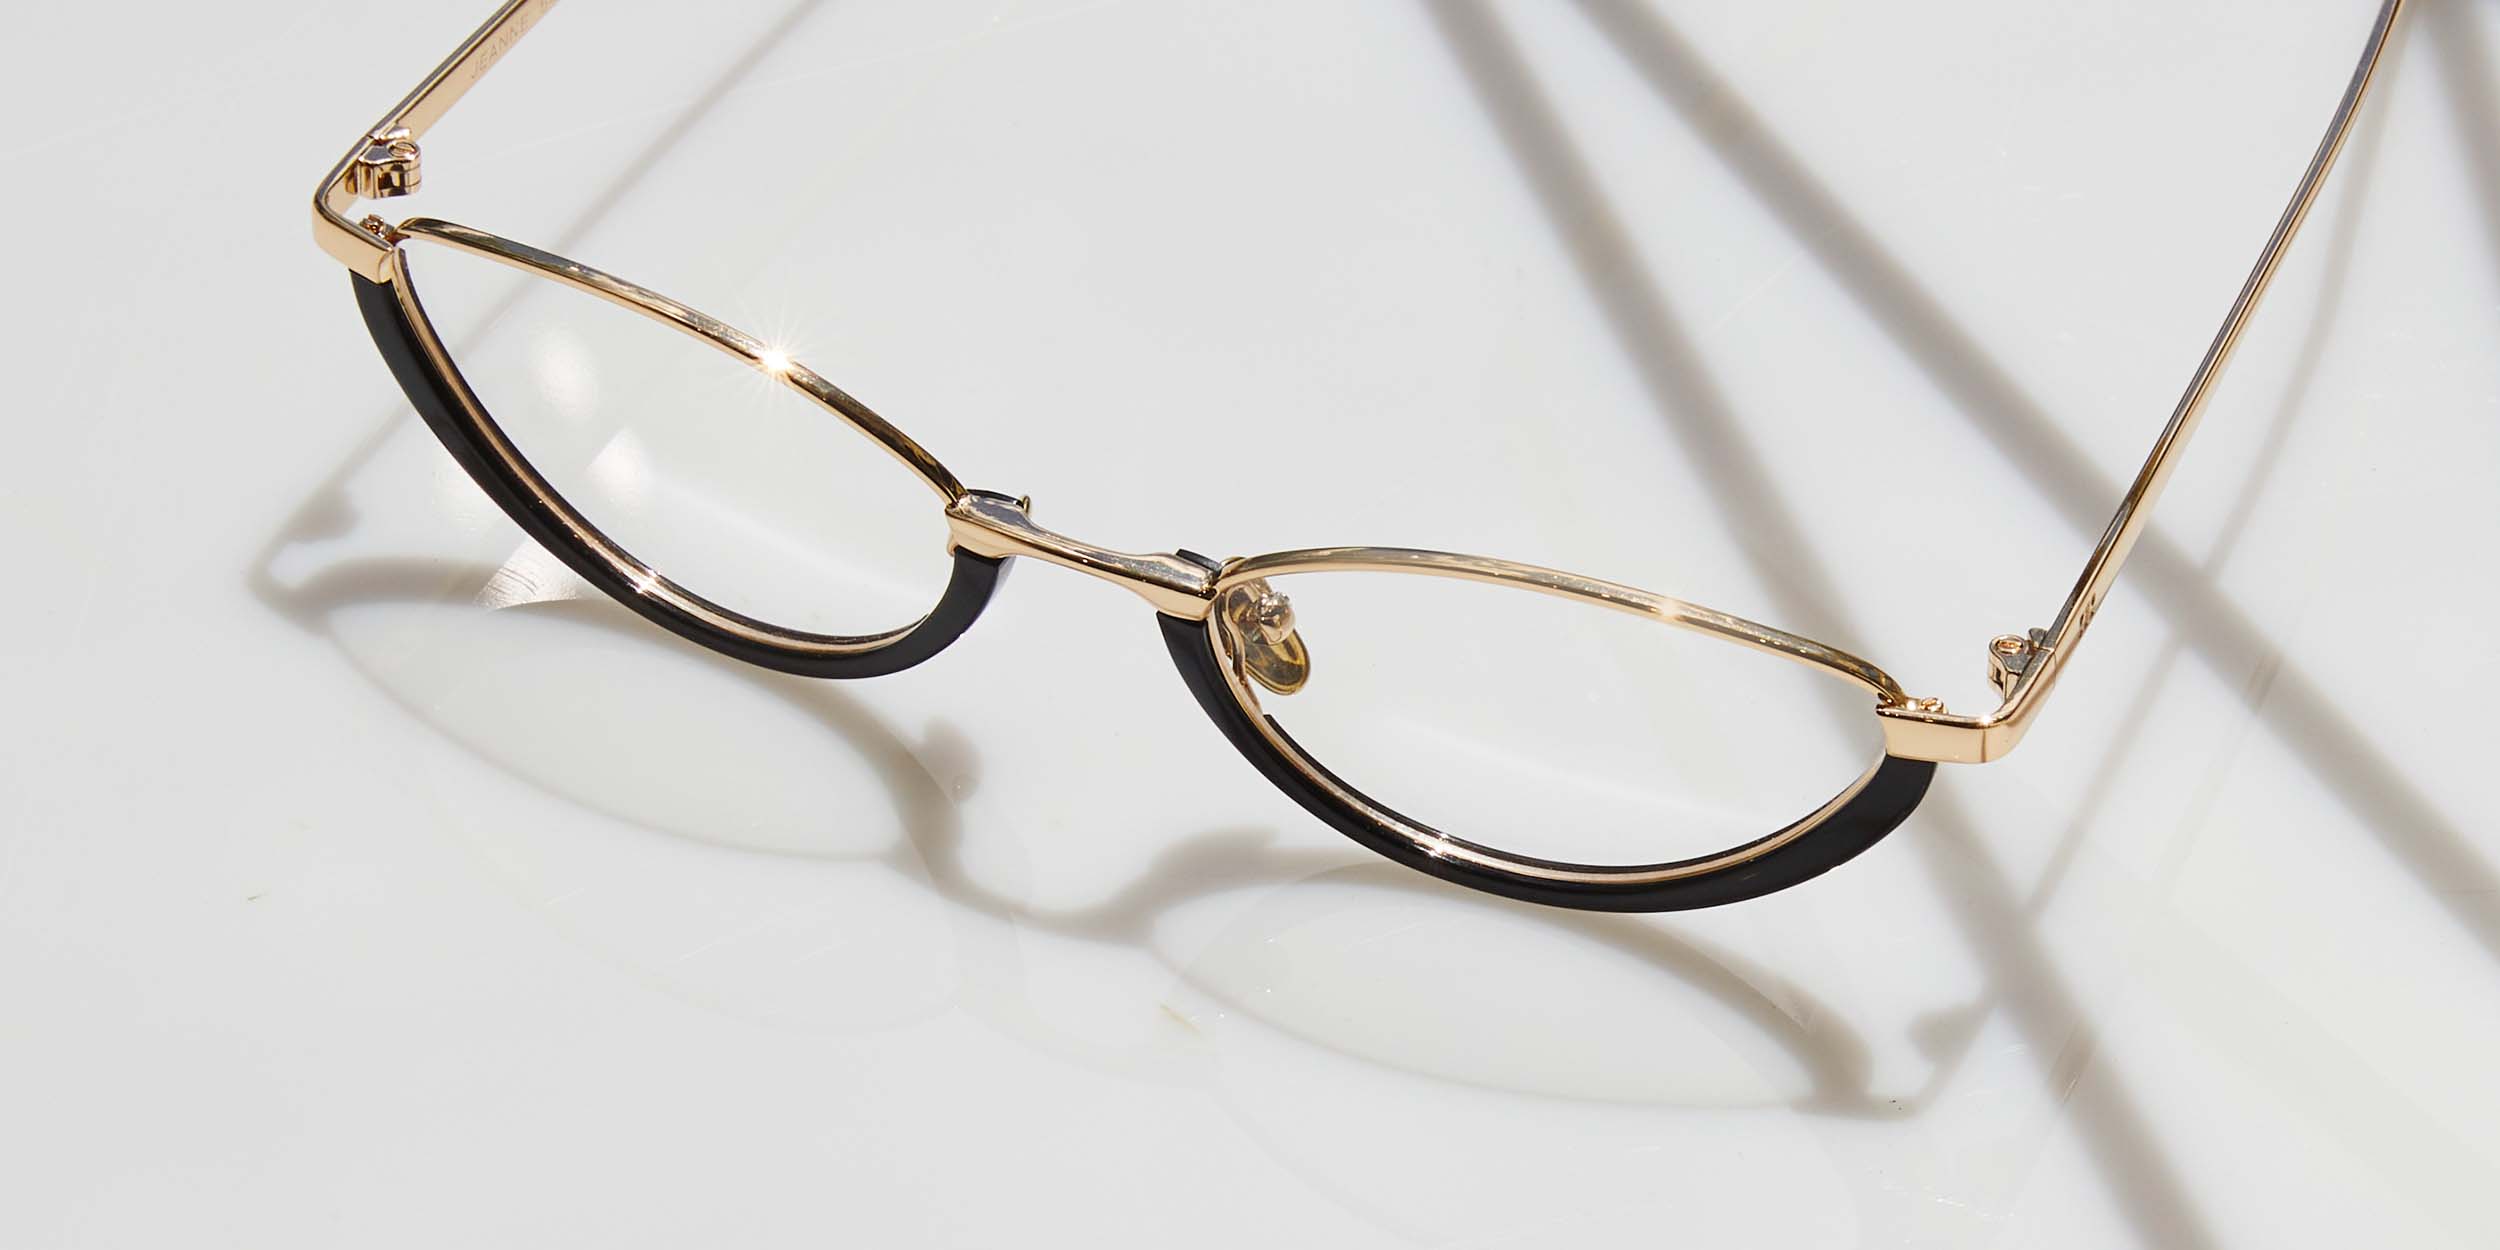 Photo Details of Jeanne Cobalt & Gold Reading Glasses in a room